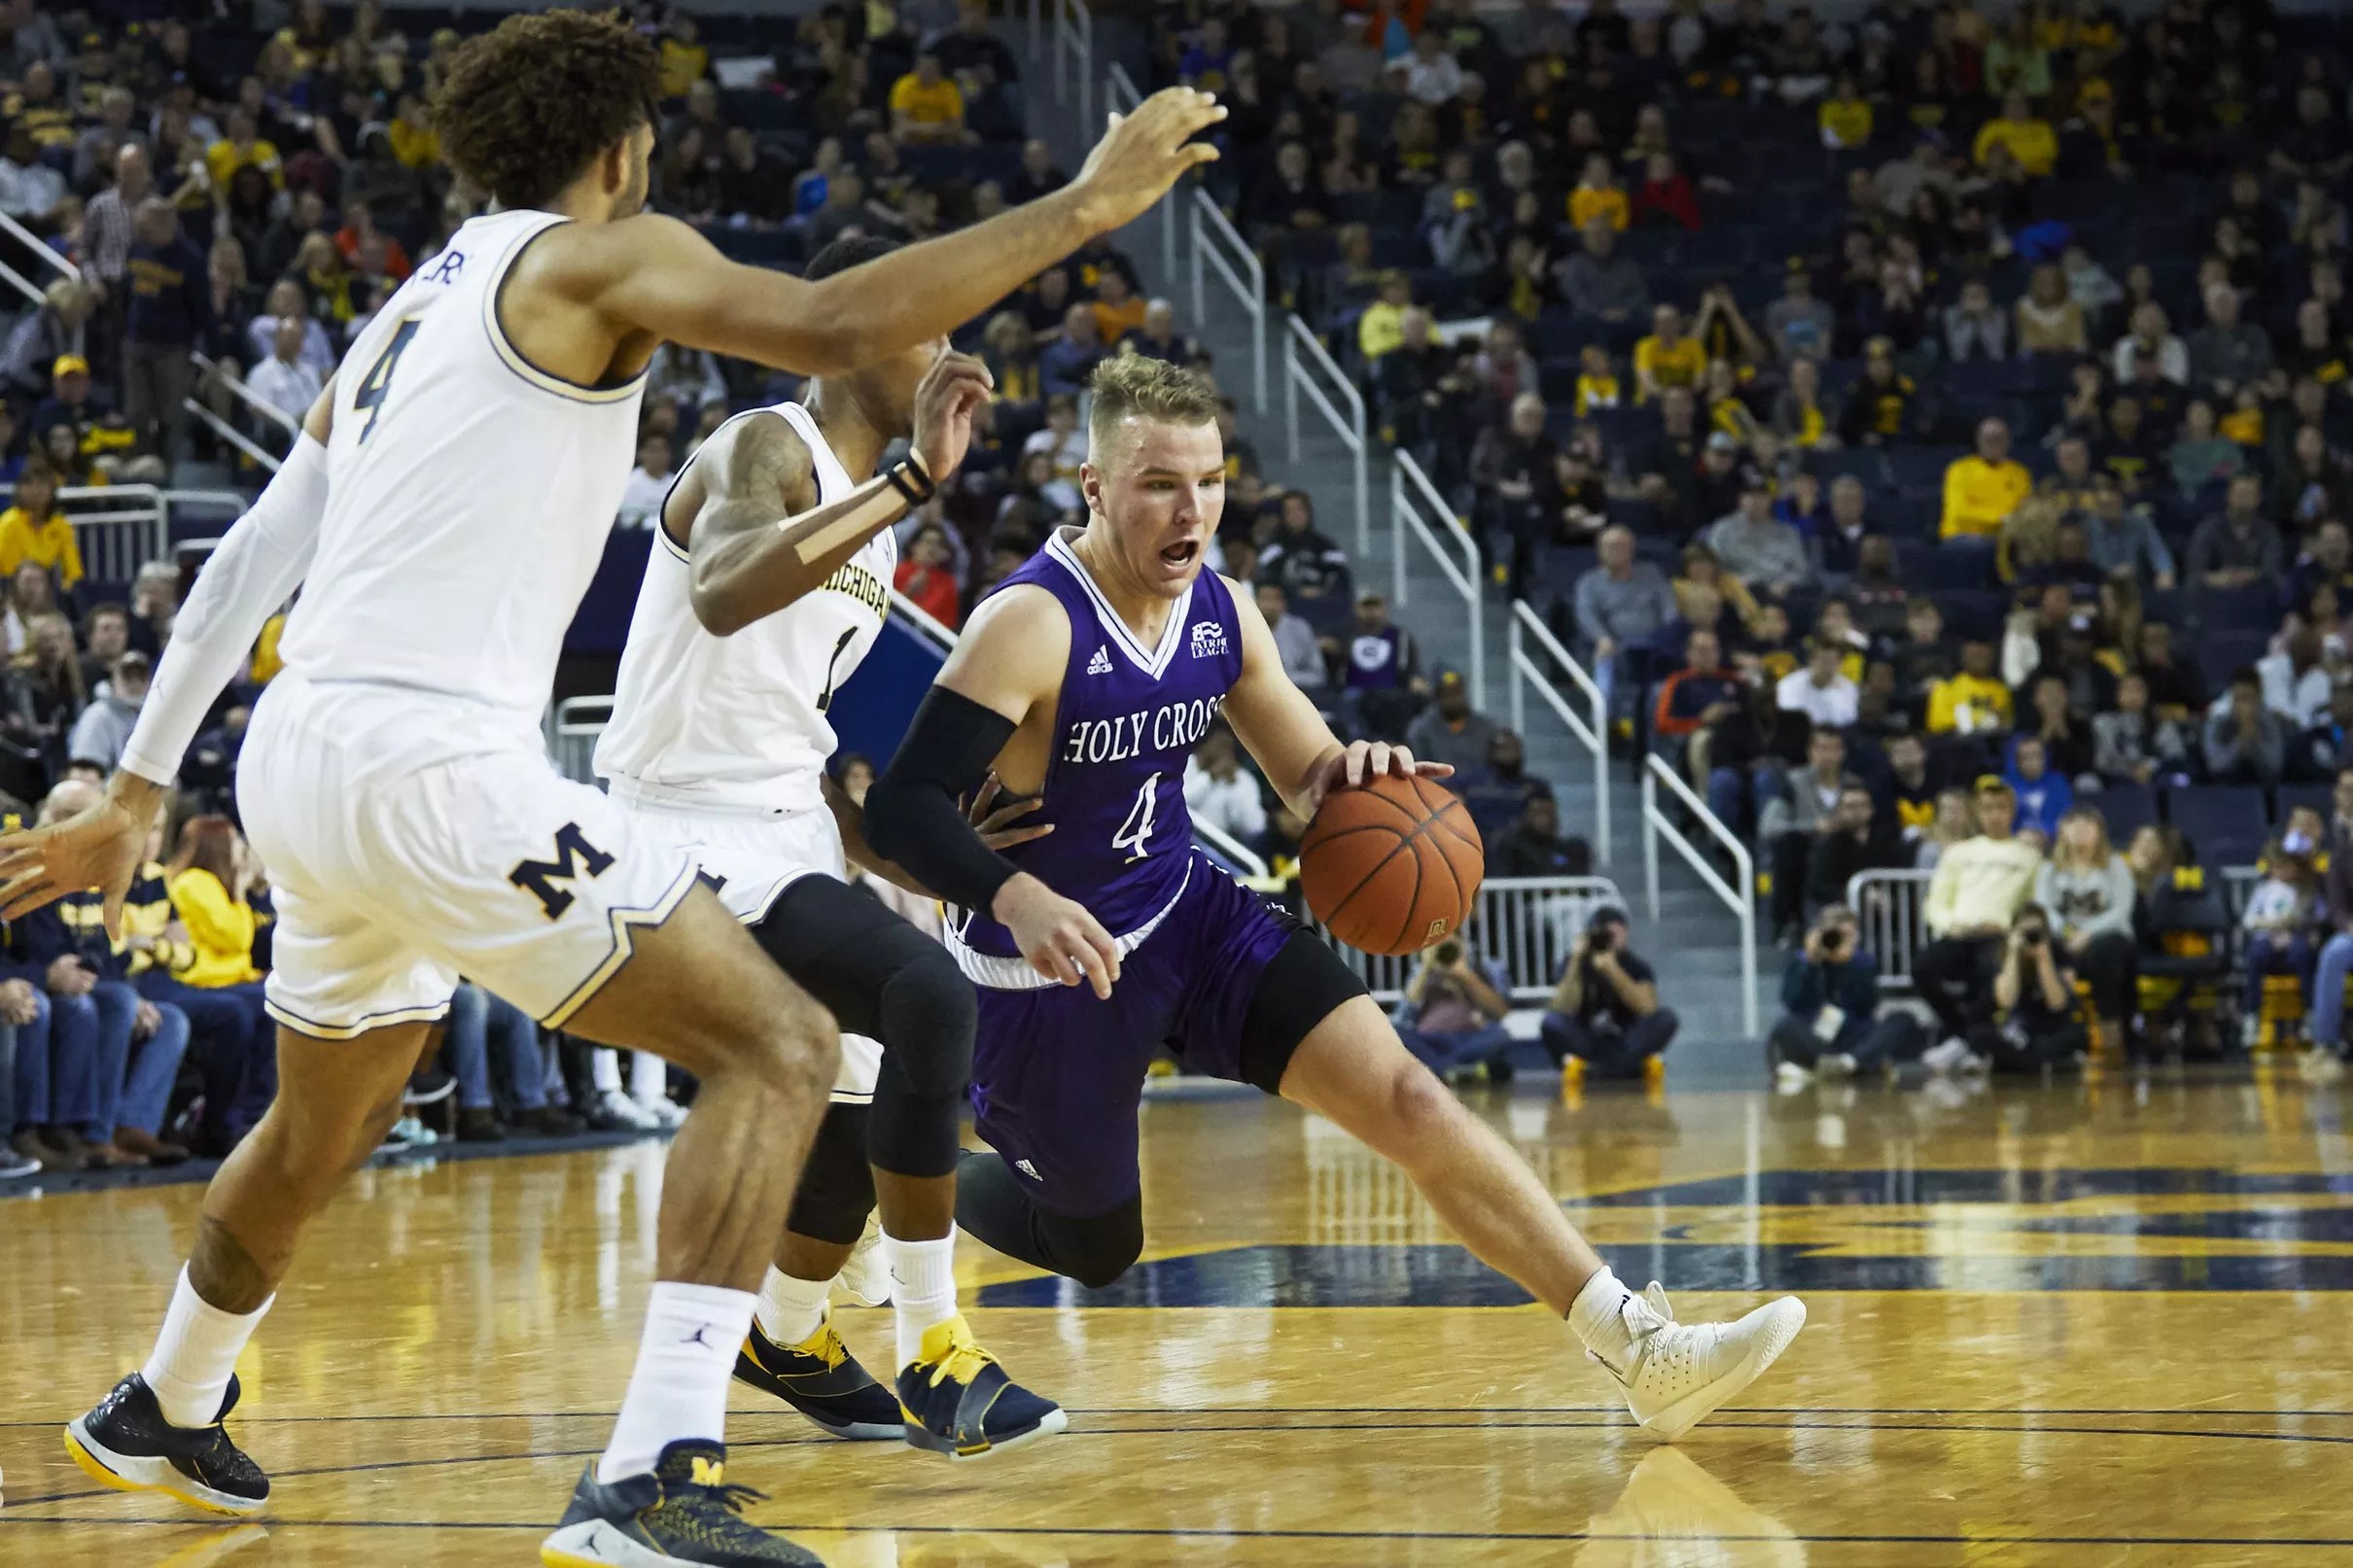 Michigan Men’s Basketball downs Holy Cross in second game of 2018-19